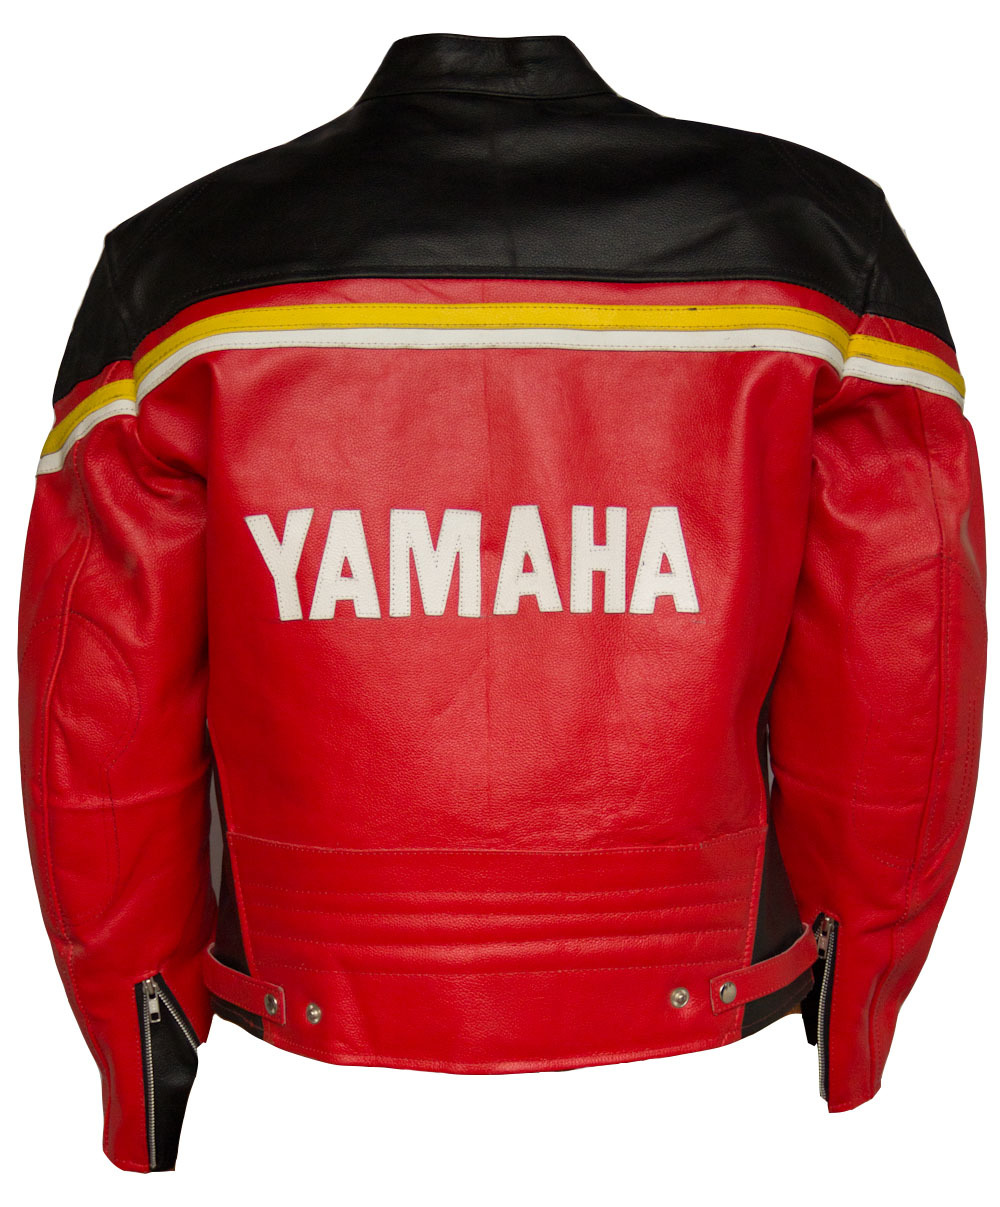 MEN YAMAHA RACING MOTORCYCLE JACKET LEATHER RED BALCK COLOR SAFETY